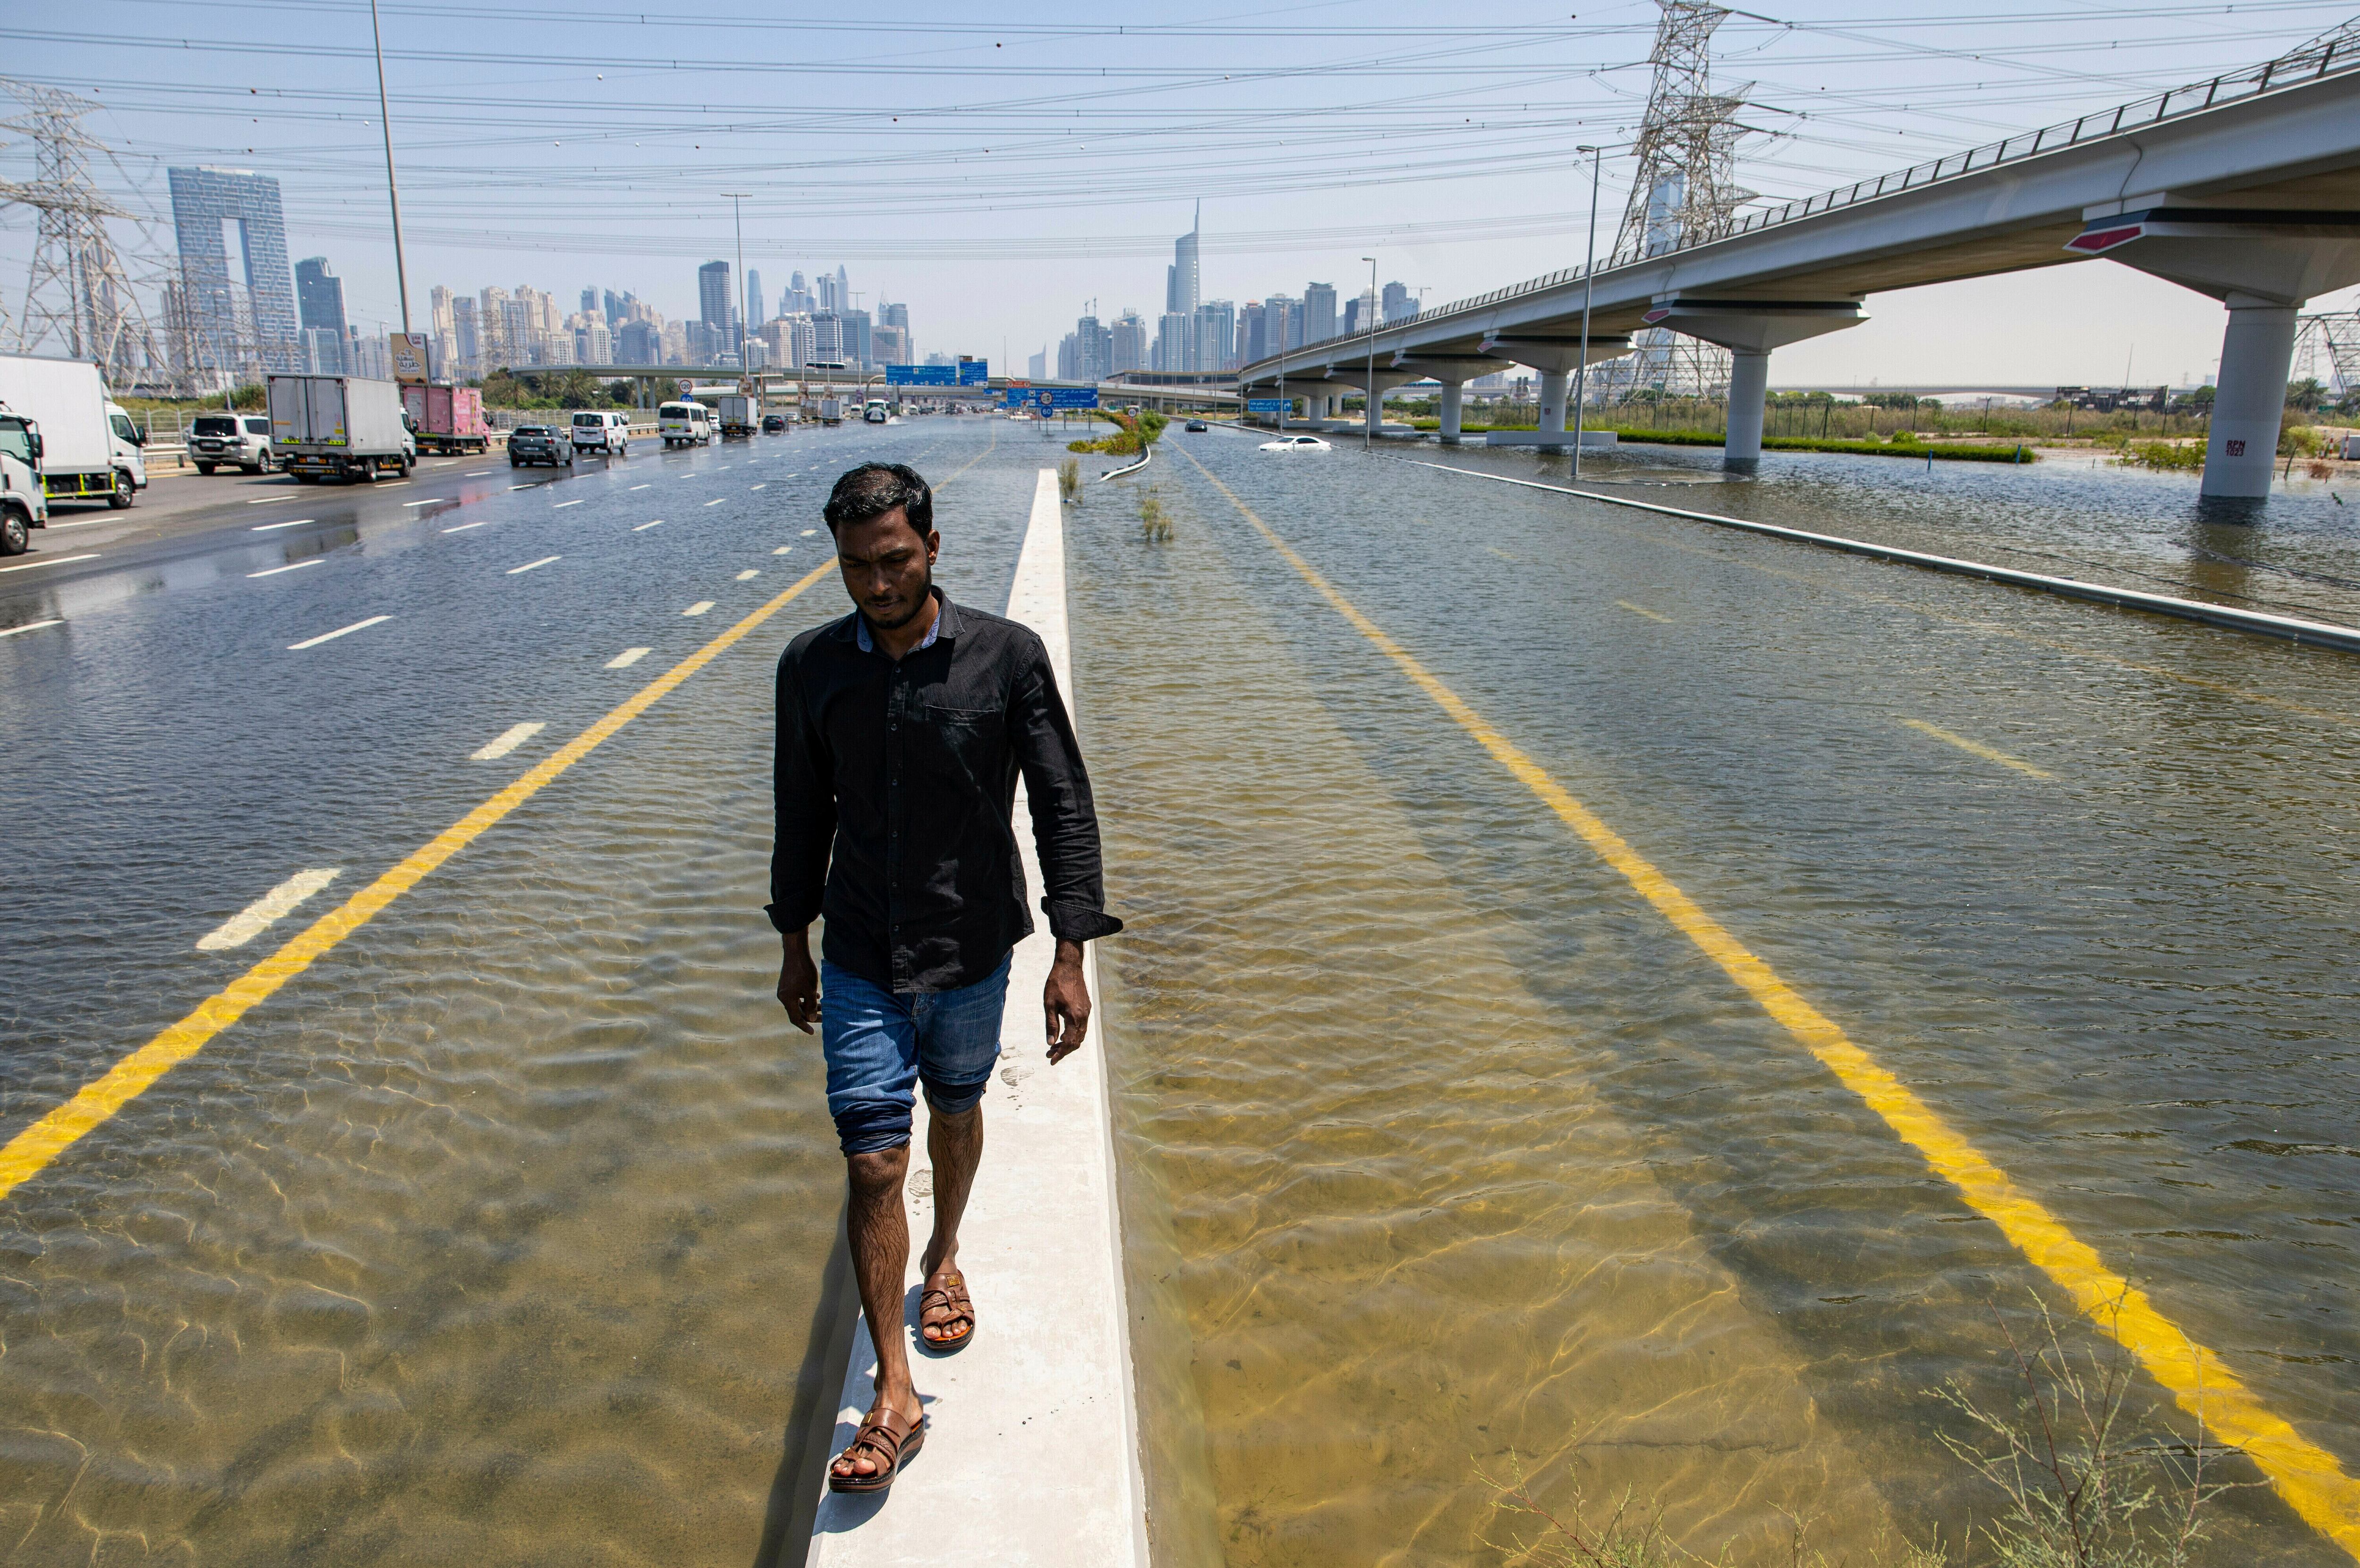 A man walks along a road barrier on Dubai's Sheikh Zayed Road amid floodwater caused by heavy rain, Thursday.